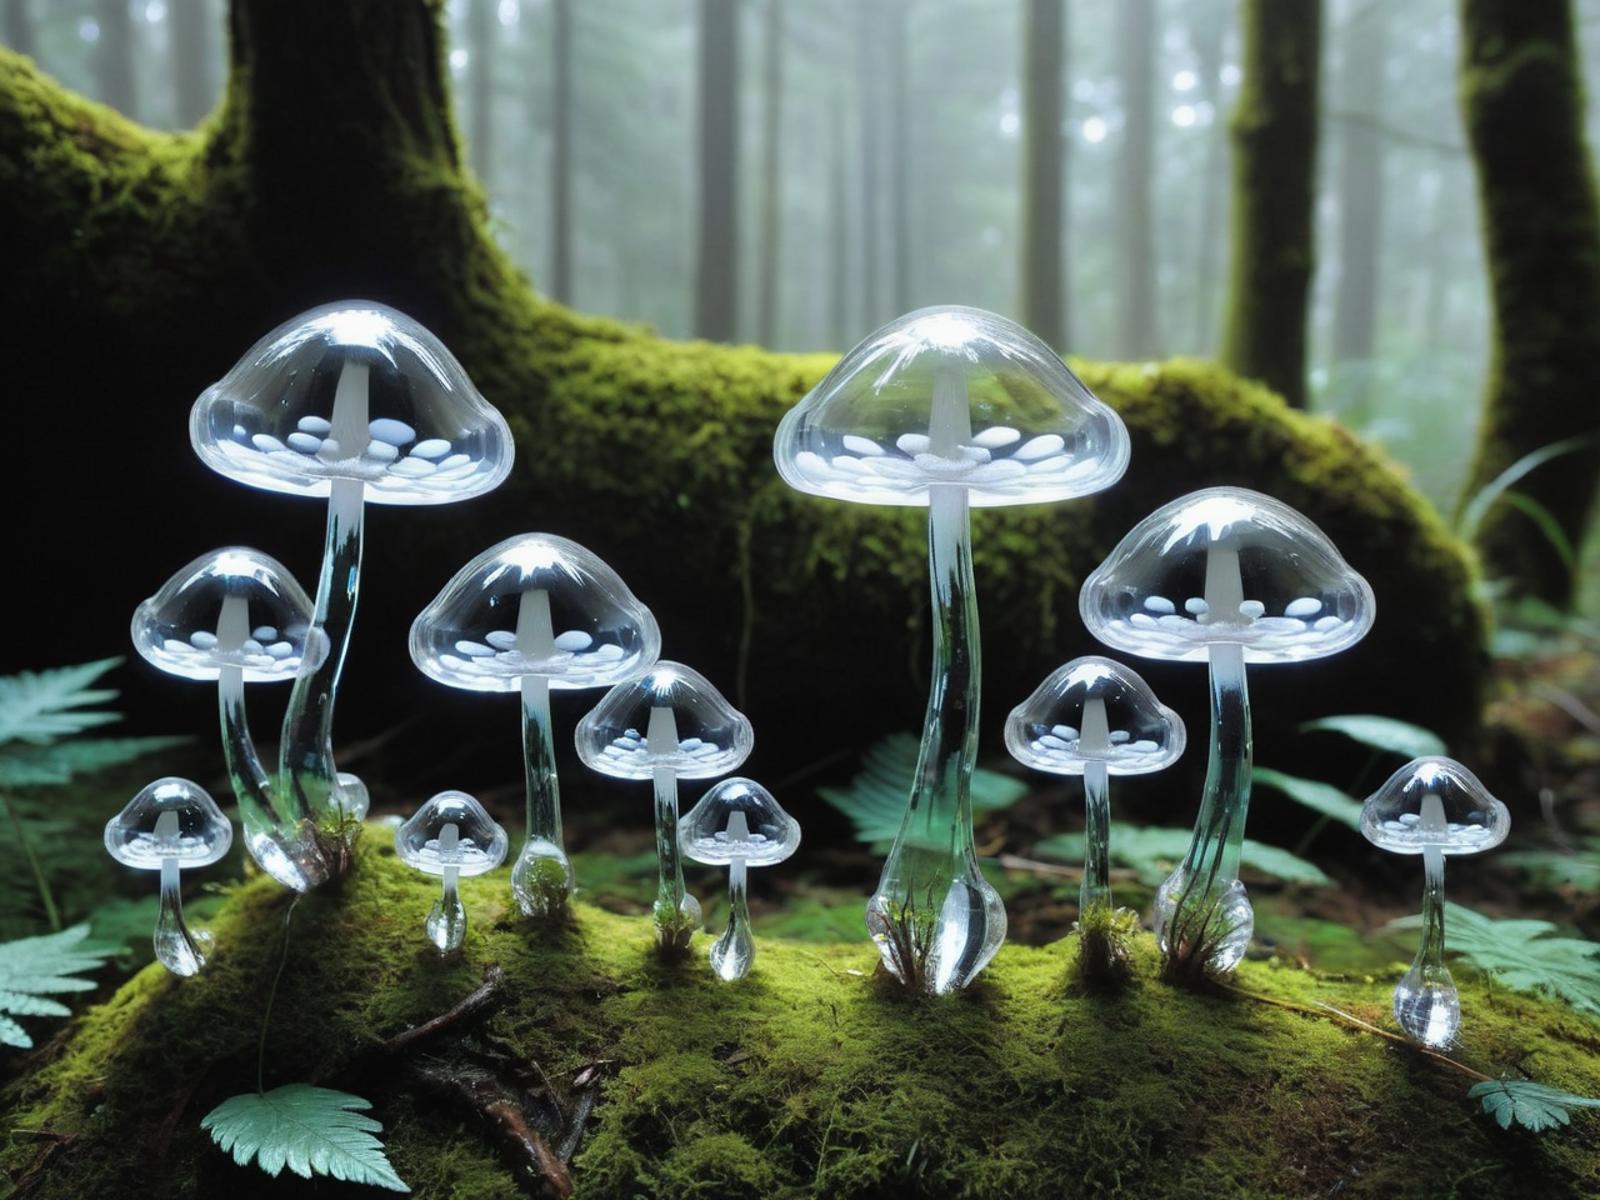 A group of glowing mushrooms growing on a mossy tree stump